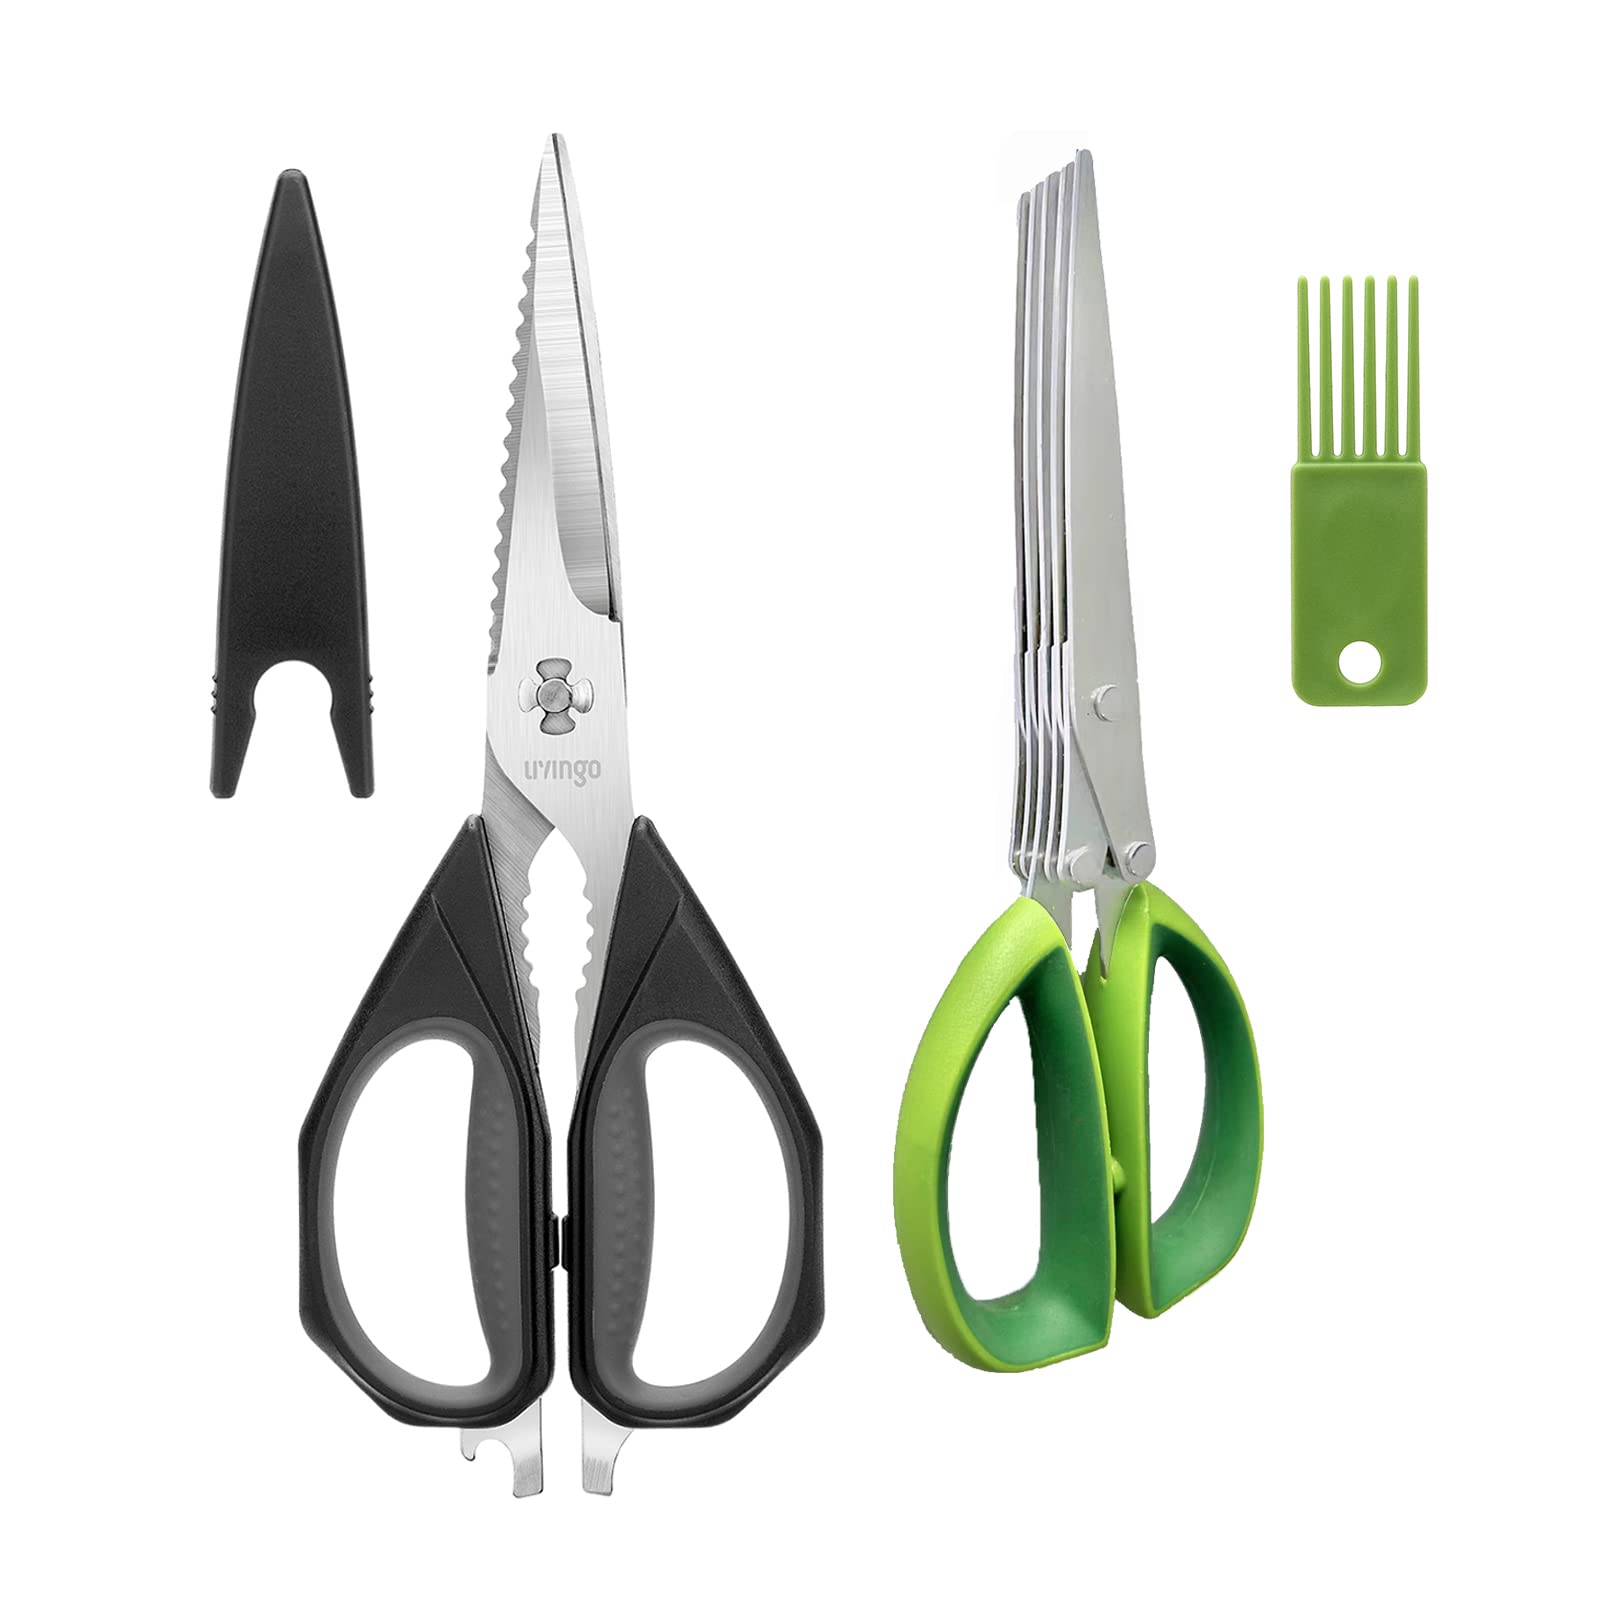 2-Piece Livingo Stainless Steel Kitchen Shears & Herb Scissors $4.78 w/ S&S + Free Shipping w/ Prime or on $35+